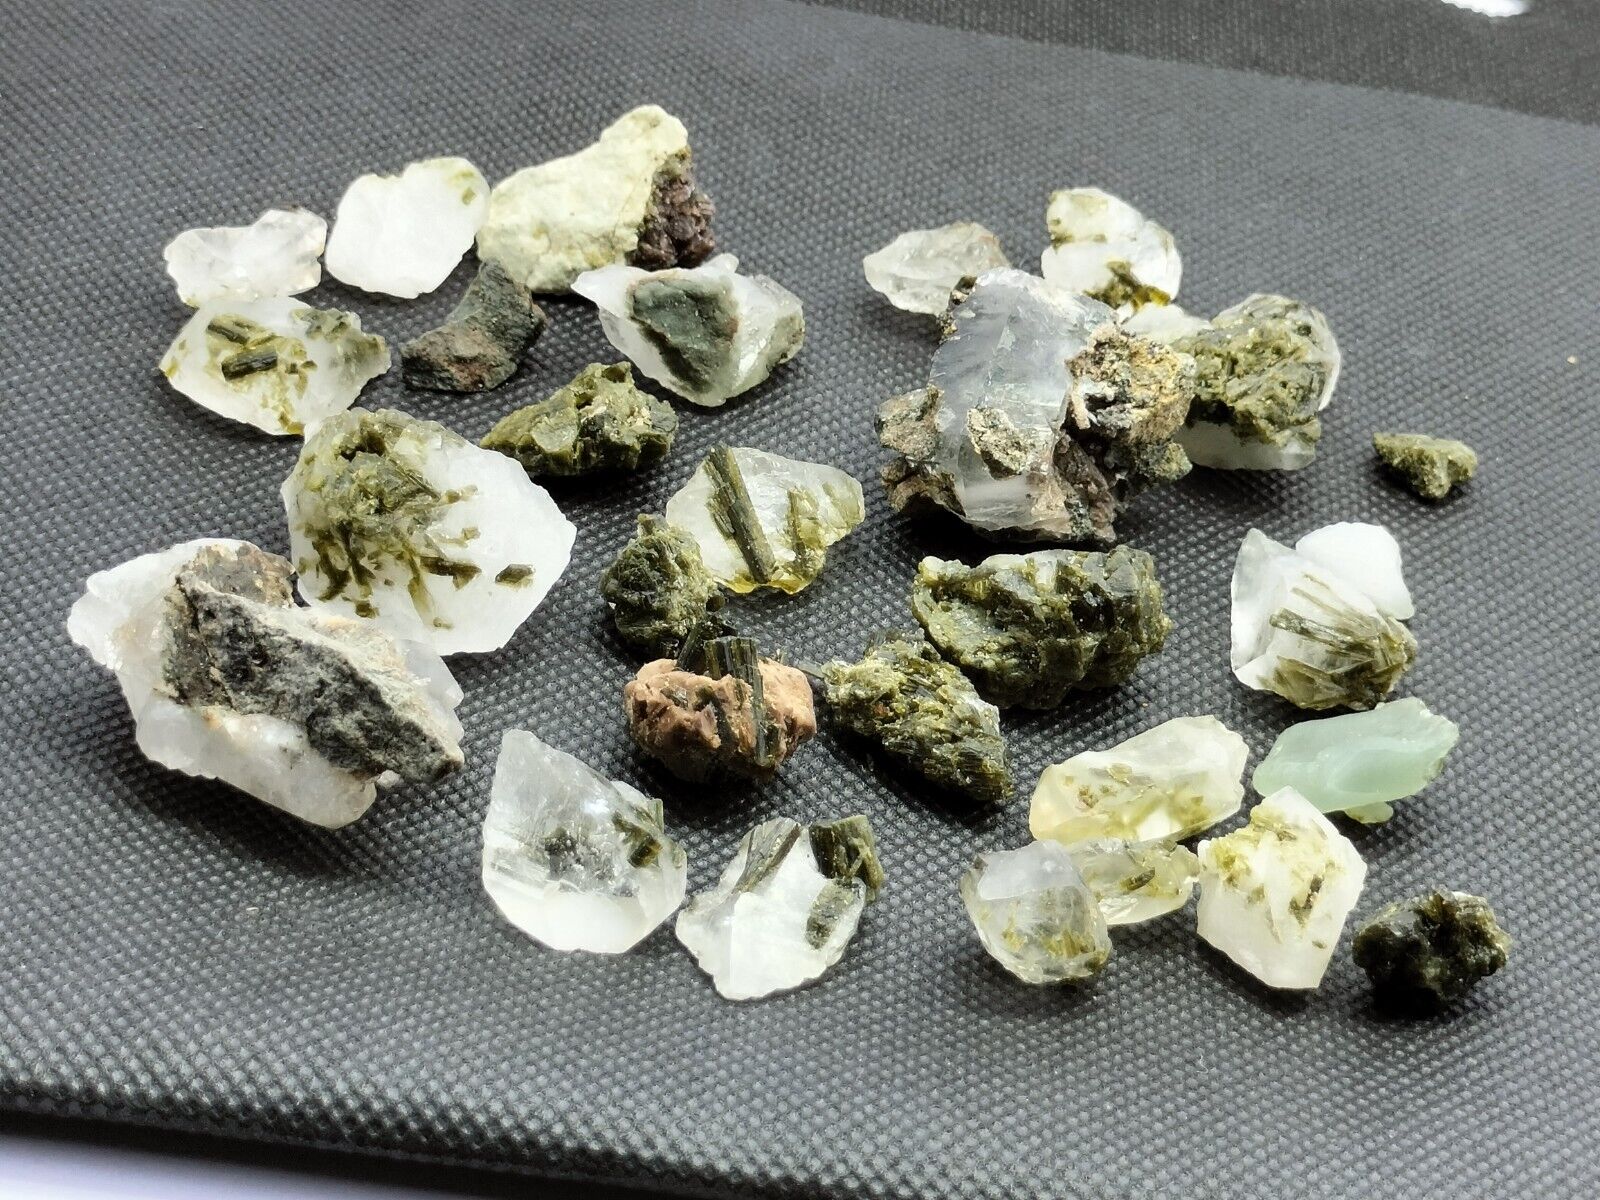 Epidote crystals specimens lot of (20+ PC\'s) from Balochistan Pakistan. \